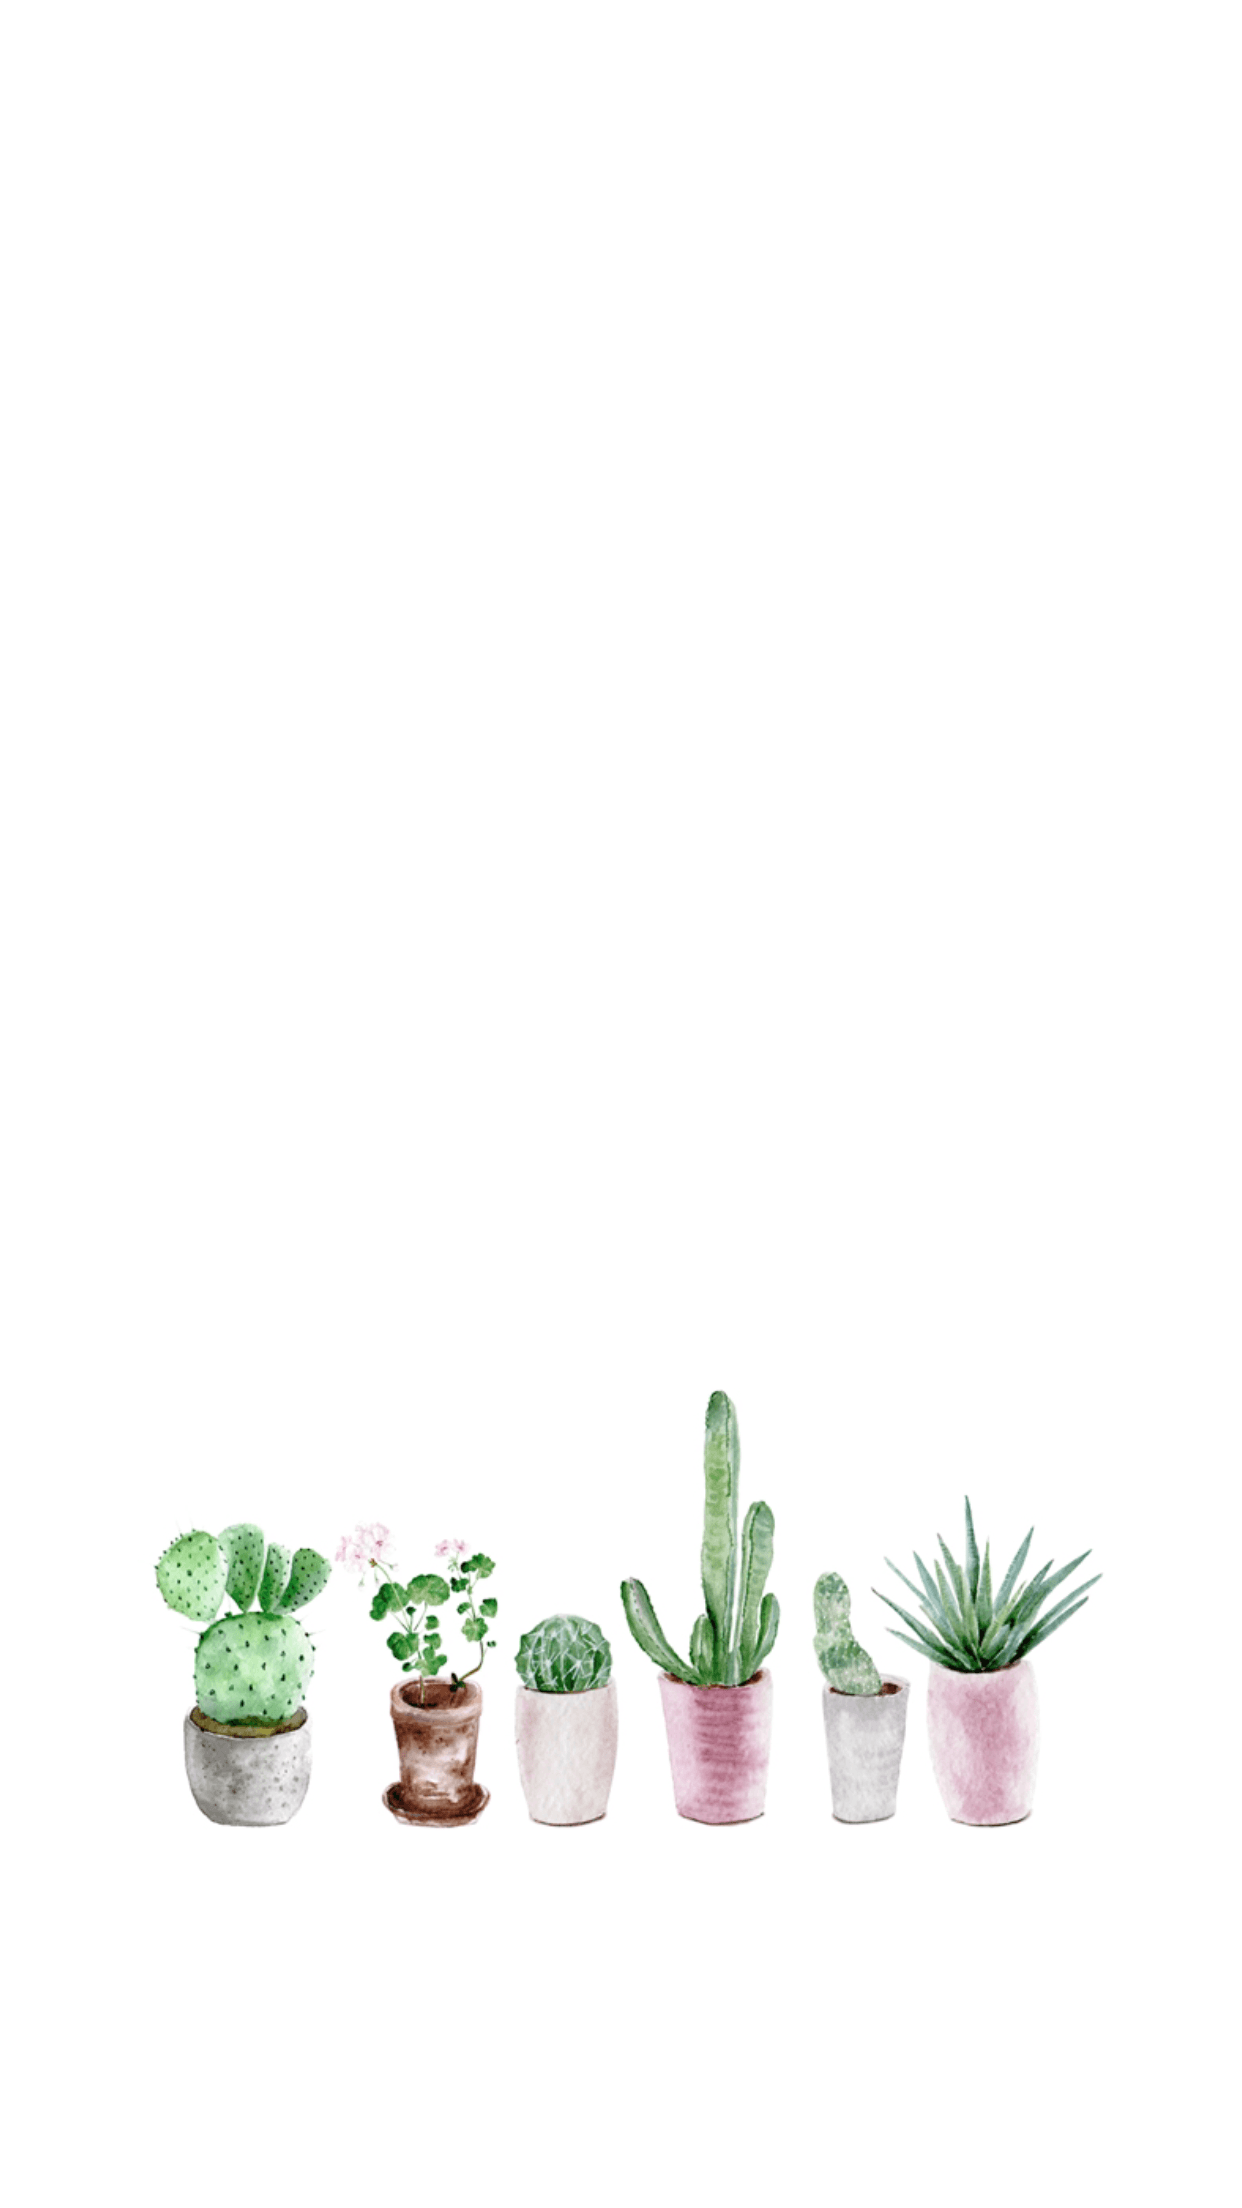 A watercolor painting of several potted plants - Cactus, succulent